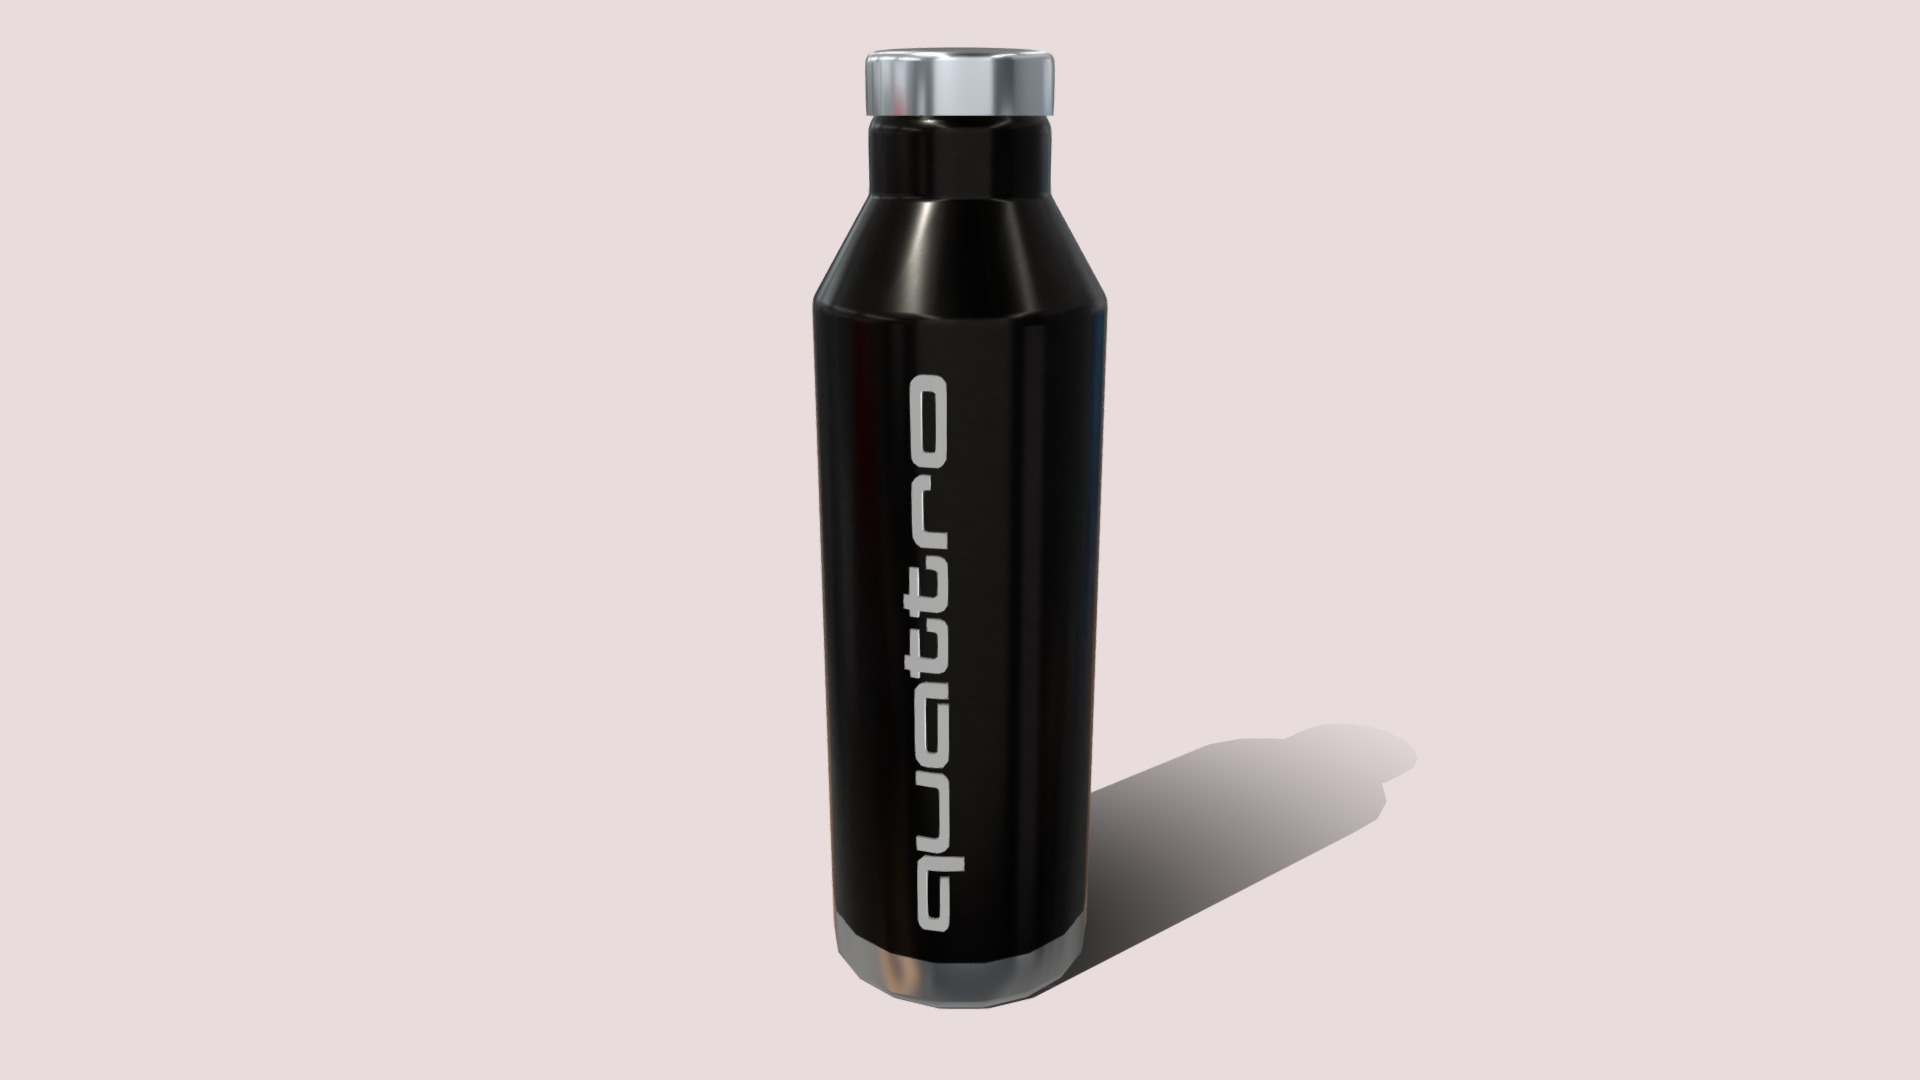 3D model Audi Bottle - This is a 3D model of the Audi Bottle. The 3D model is about a black cylindrical object with a white label on it.